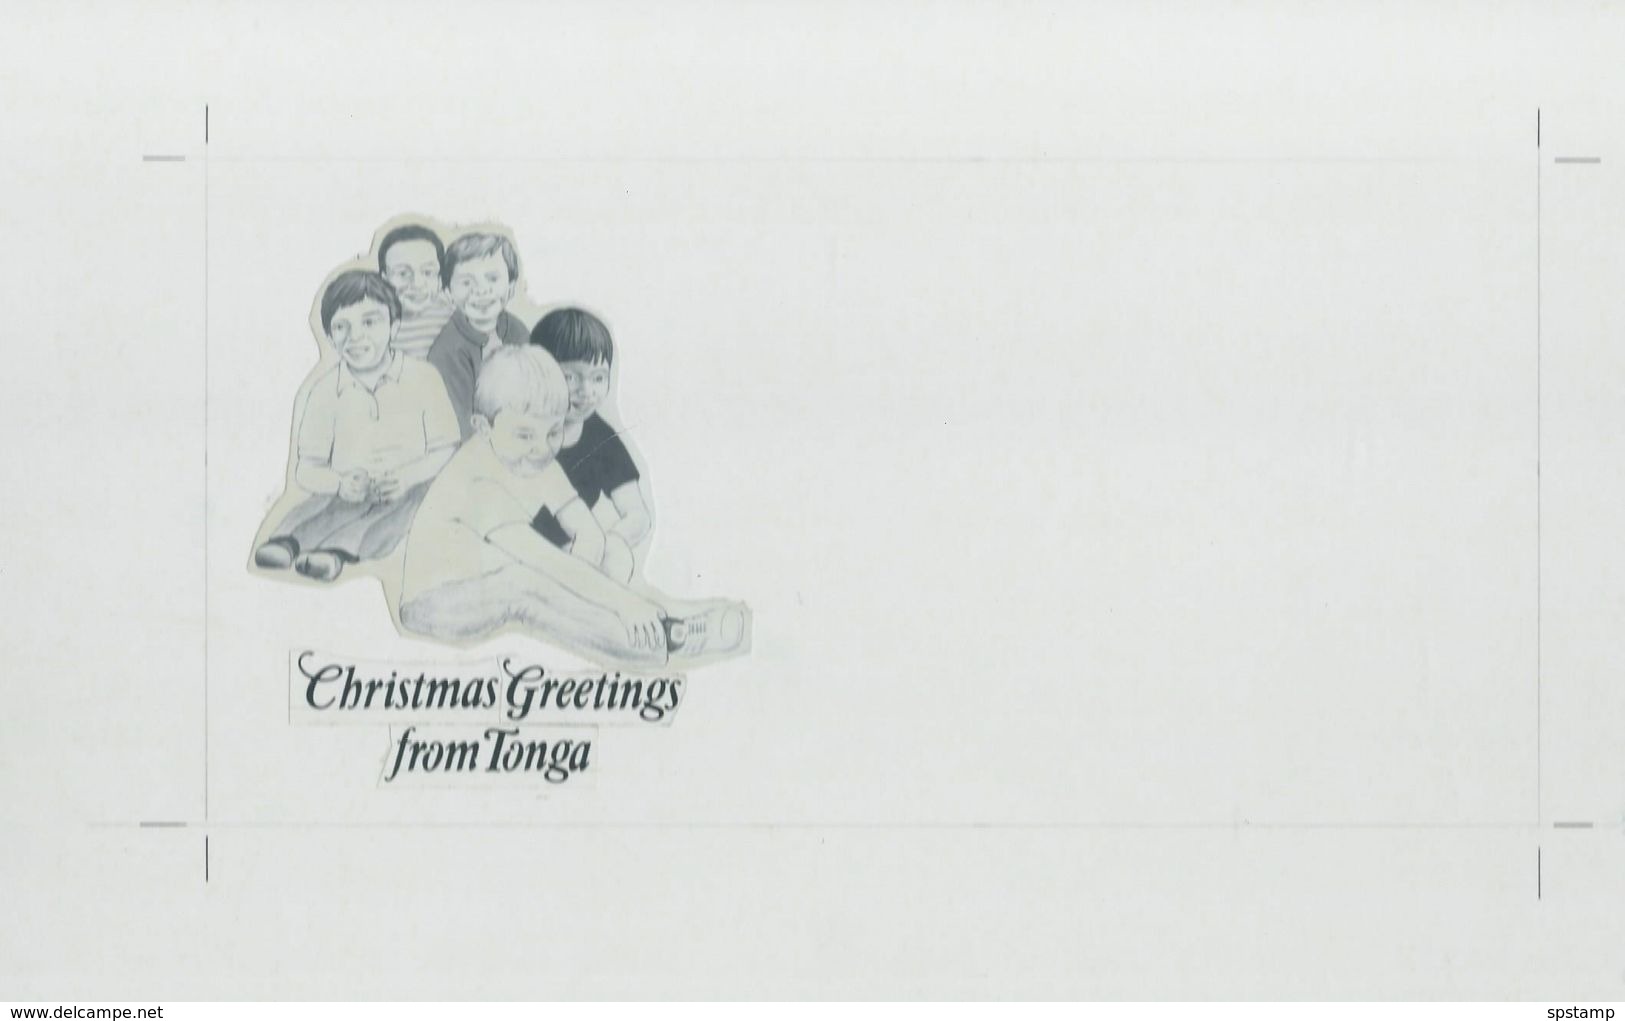 Tonga 1990 Rotary Christmas Issue Artist Drawings & Proofs For FDC , Unaccepted Essays For Set & Printer Correspondence - Tonga (1970-...)